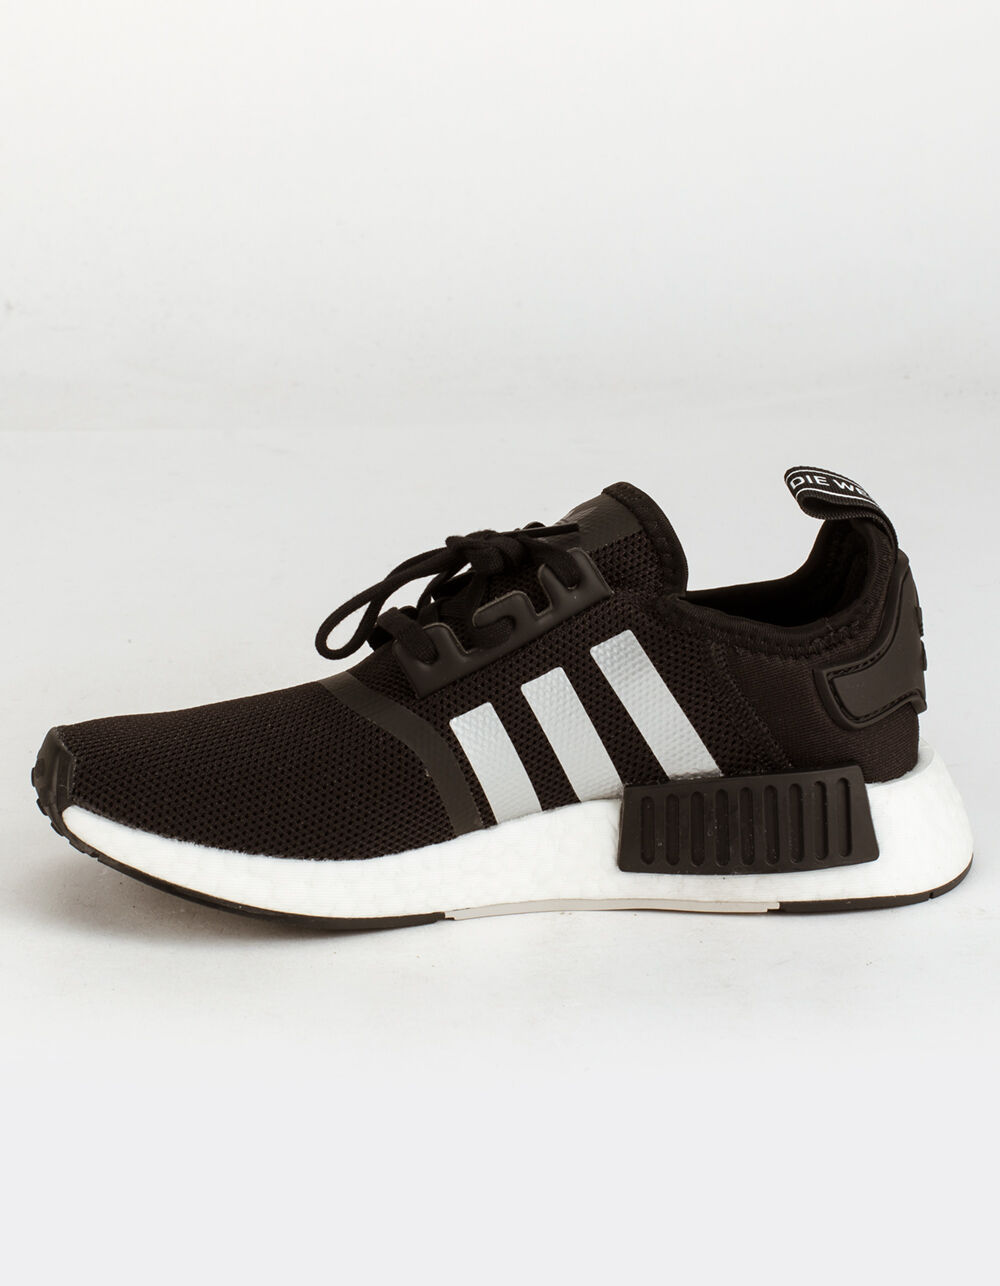 ADIDAS NMD_R1 Juniors Shoes - BLACK COMBO | Tillys